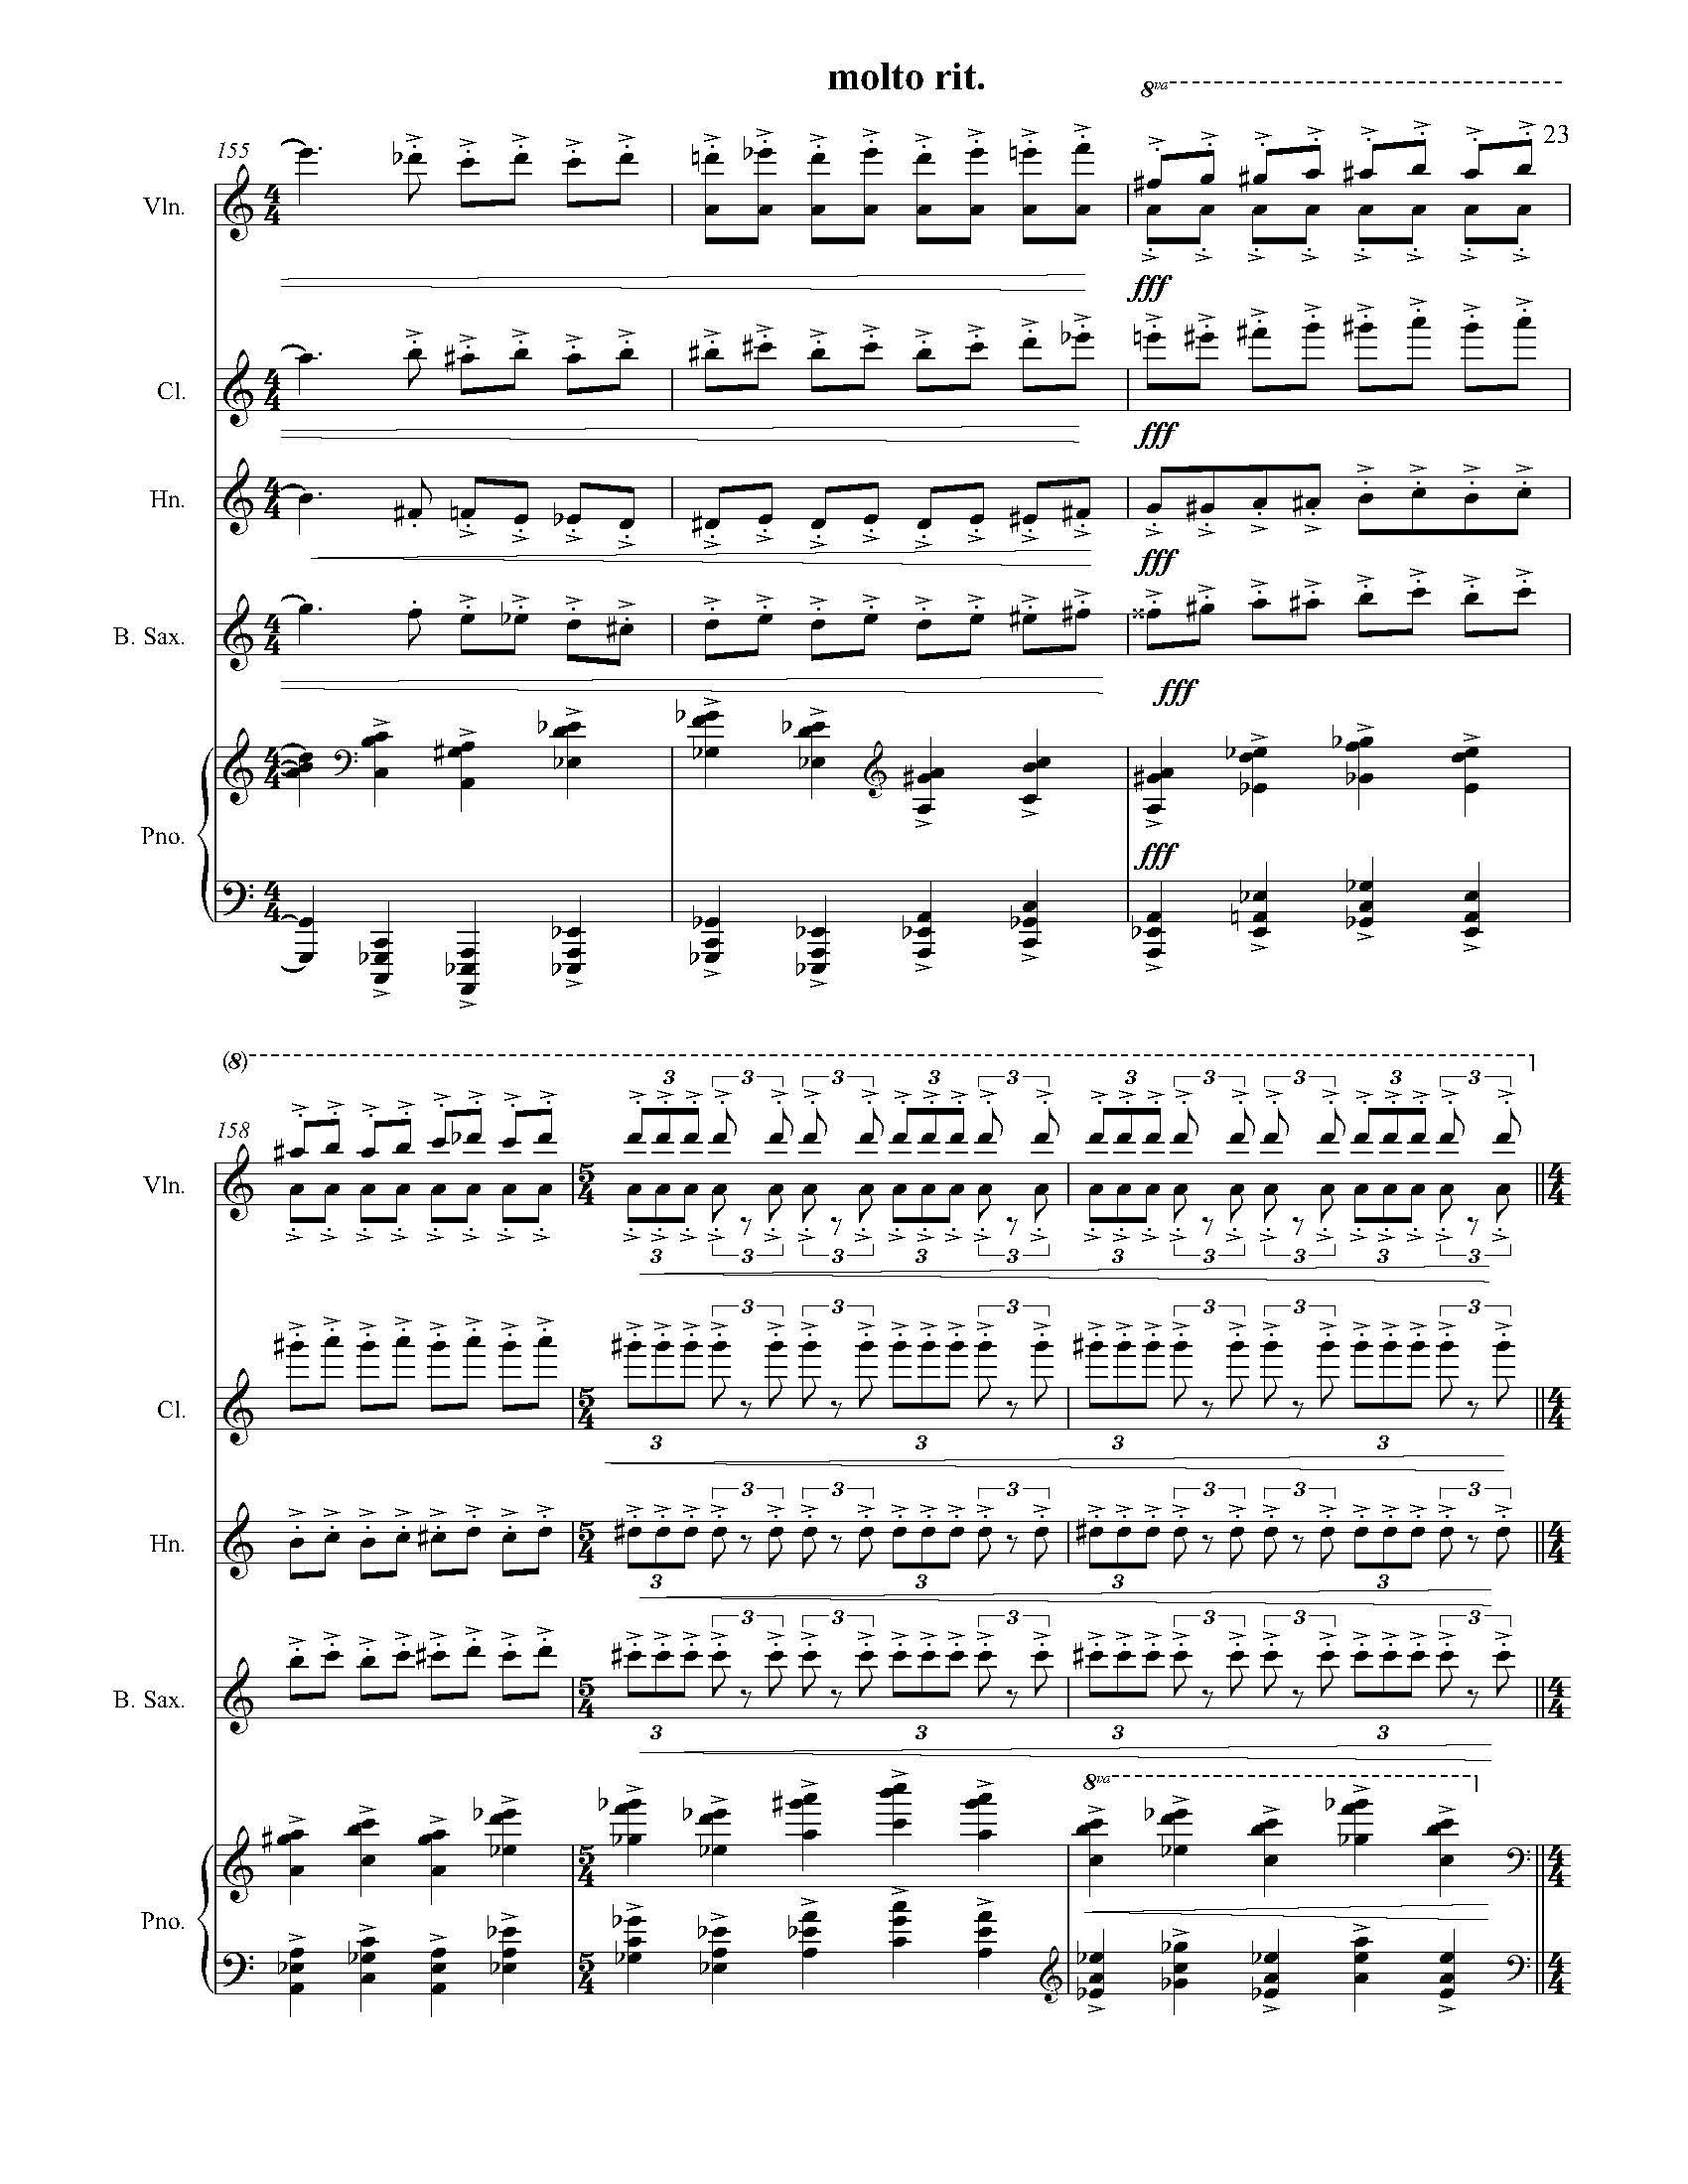 The Outlaw in the Gilded Age - Complete Score_Page_27.jpg